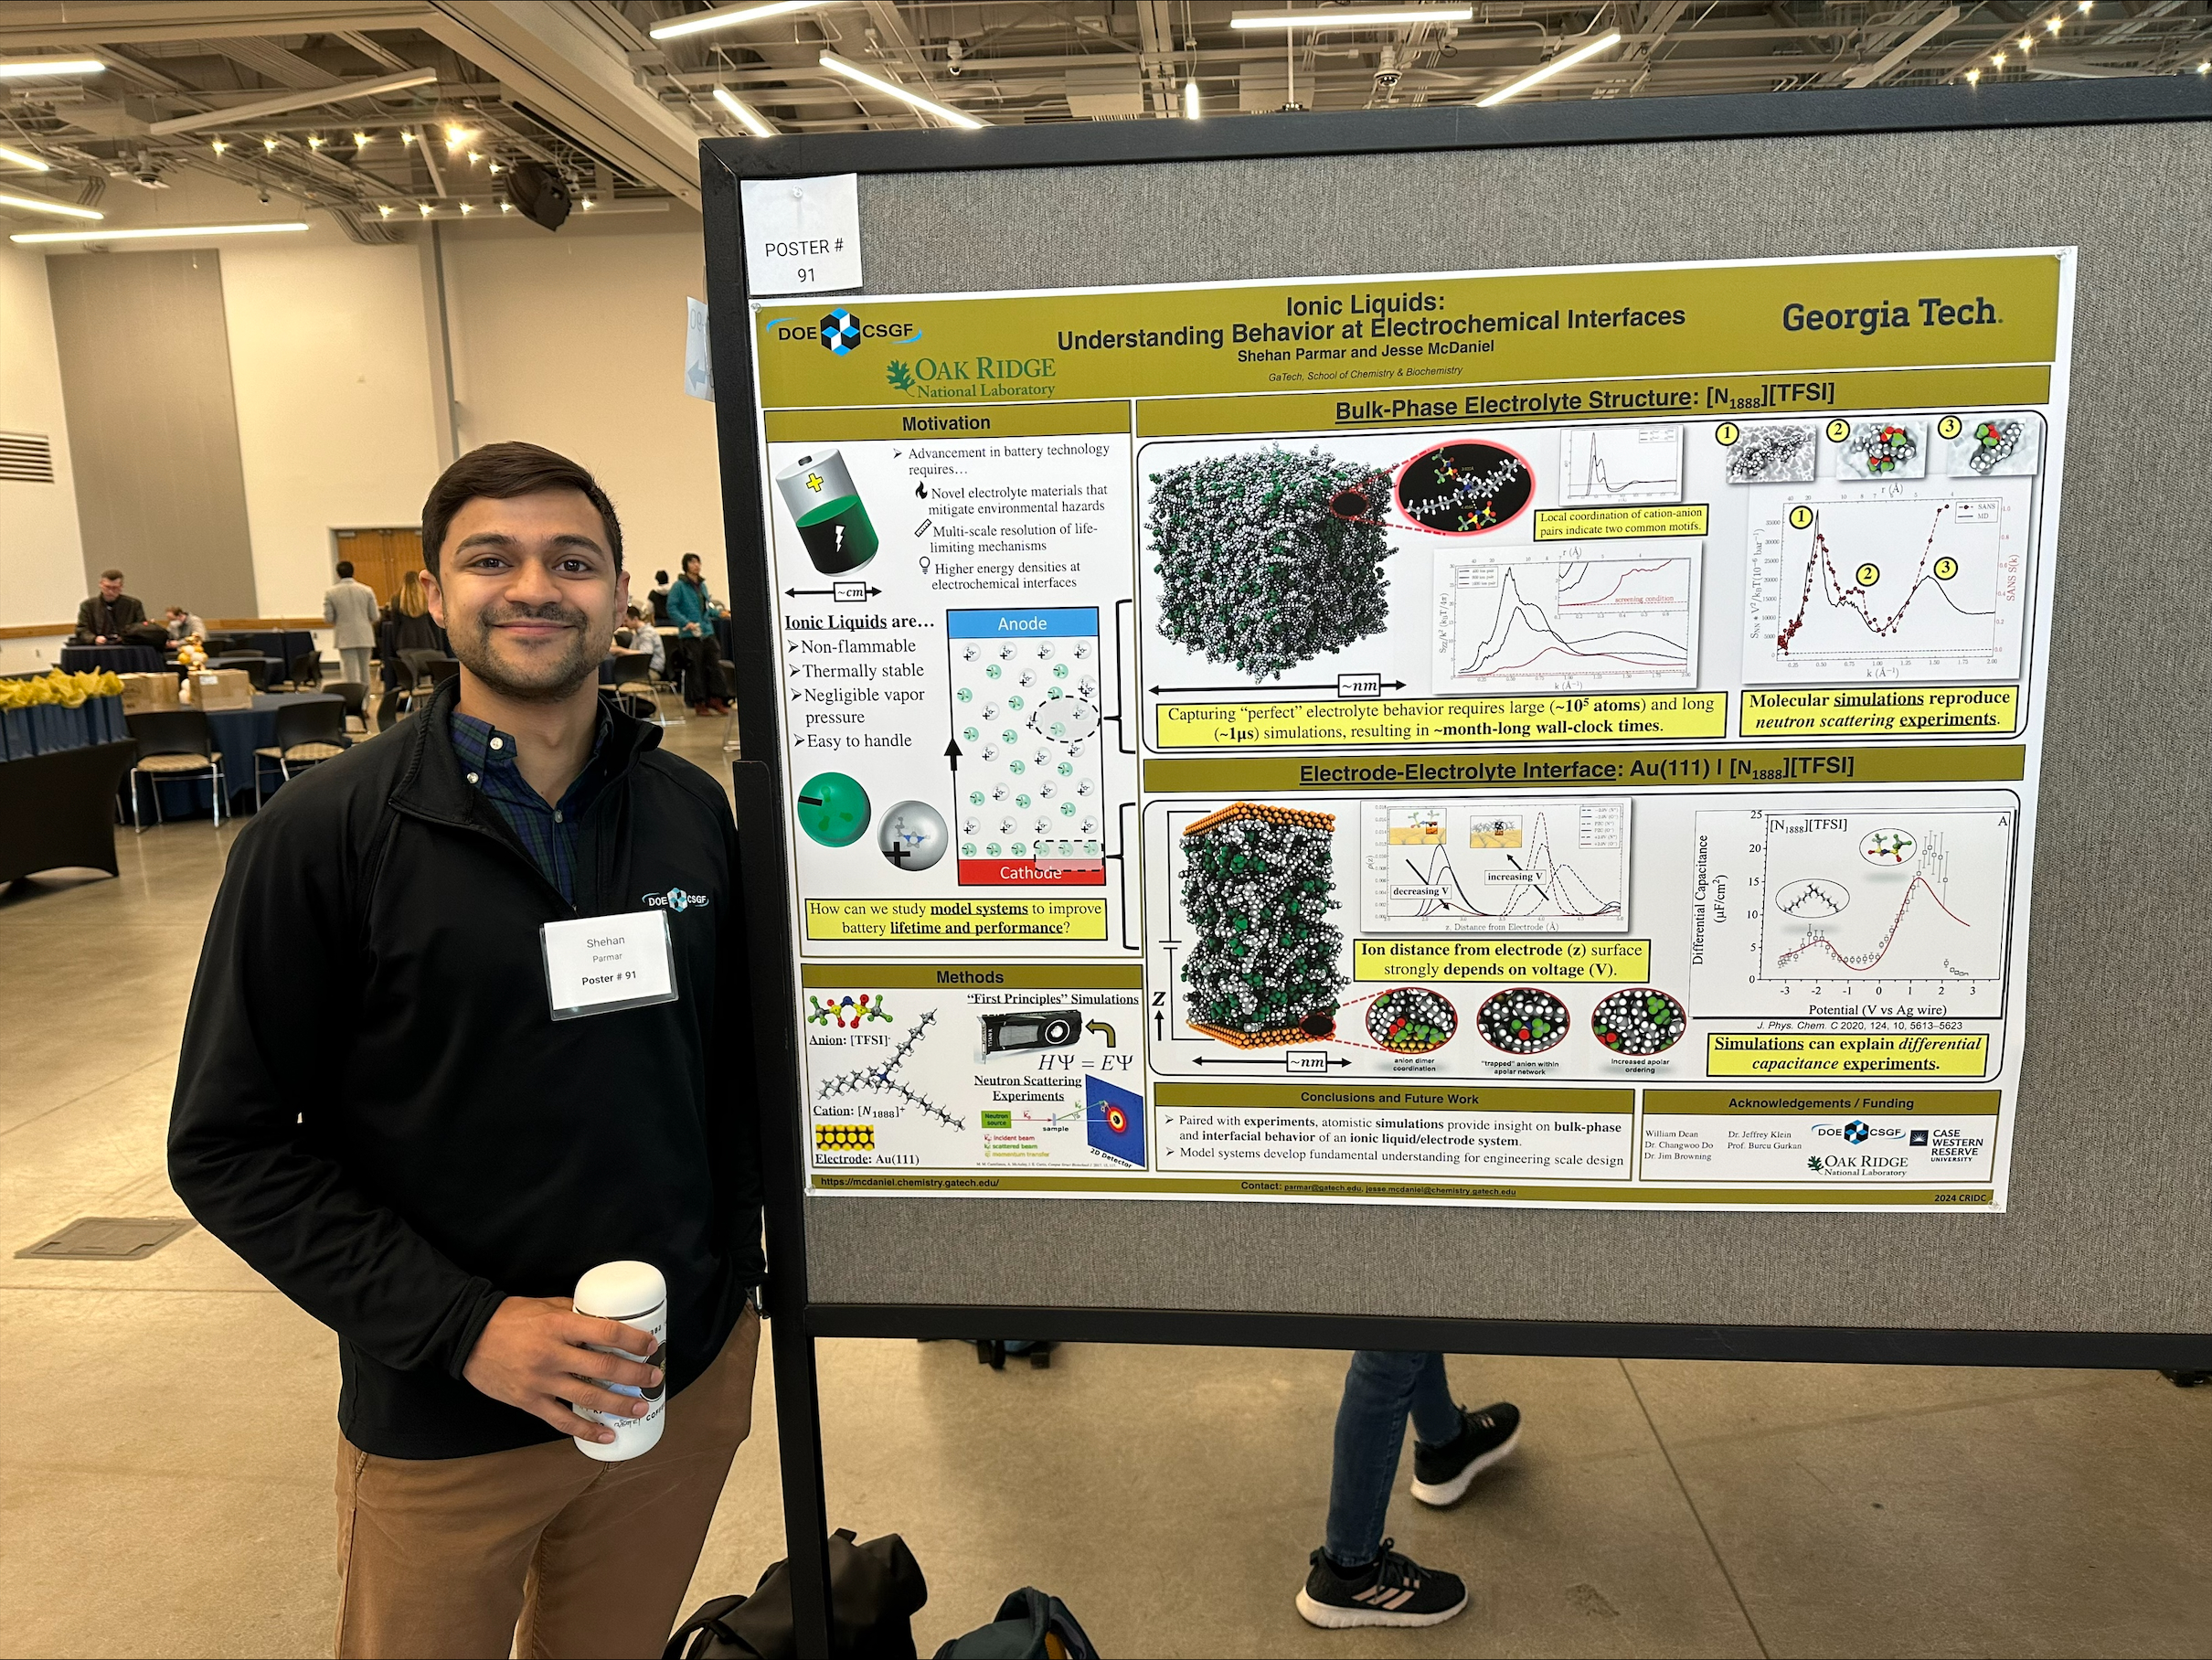 Shehan Parmar with his award-winning poster on theoretical studies of ionic liquids.